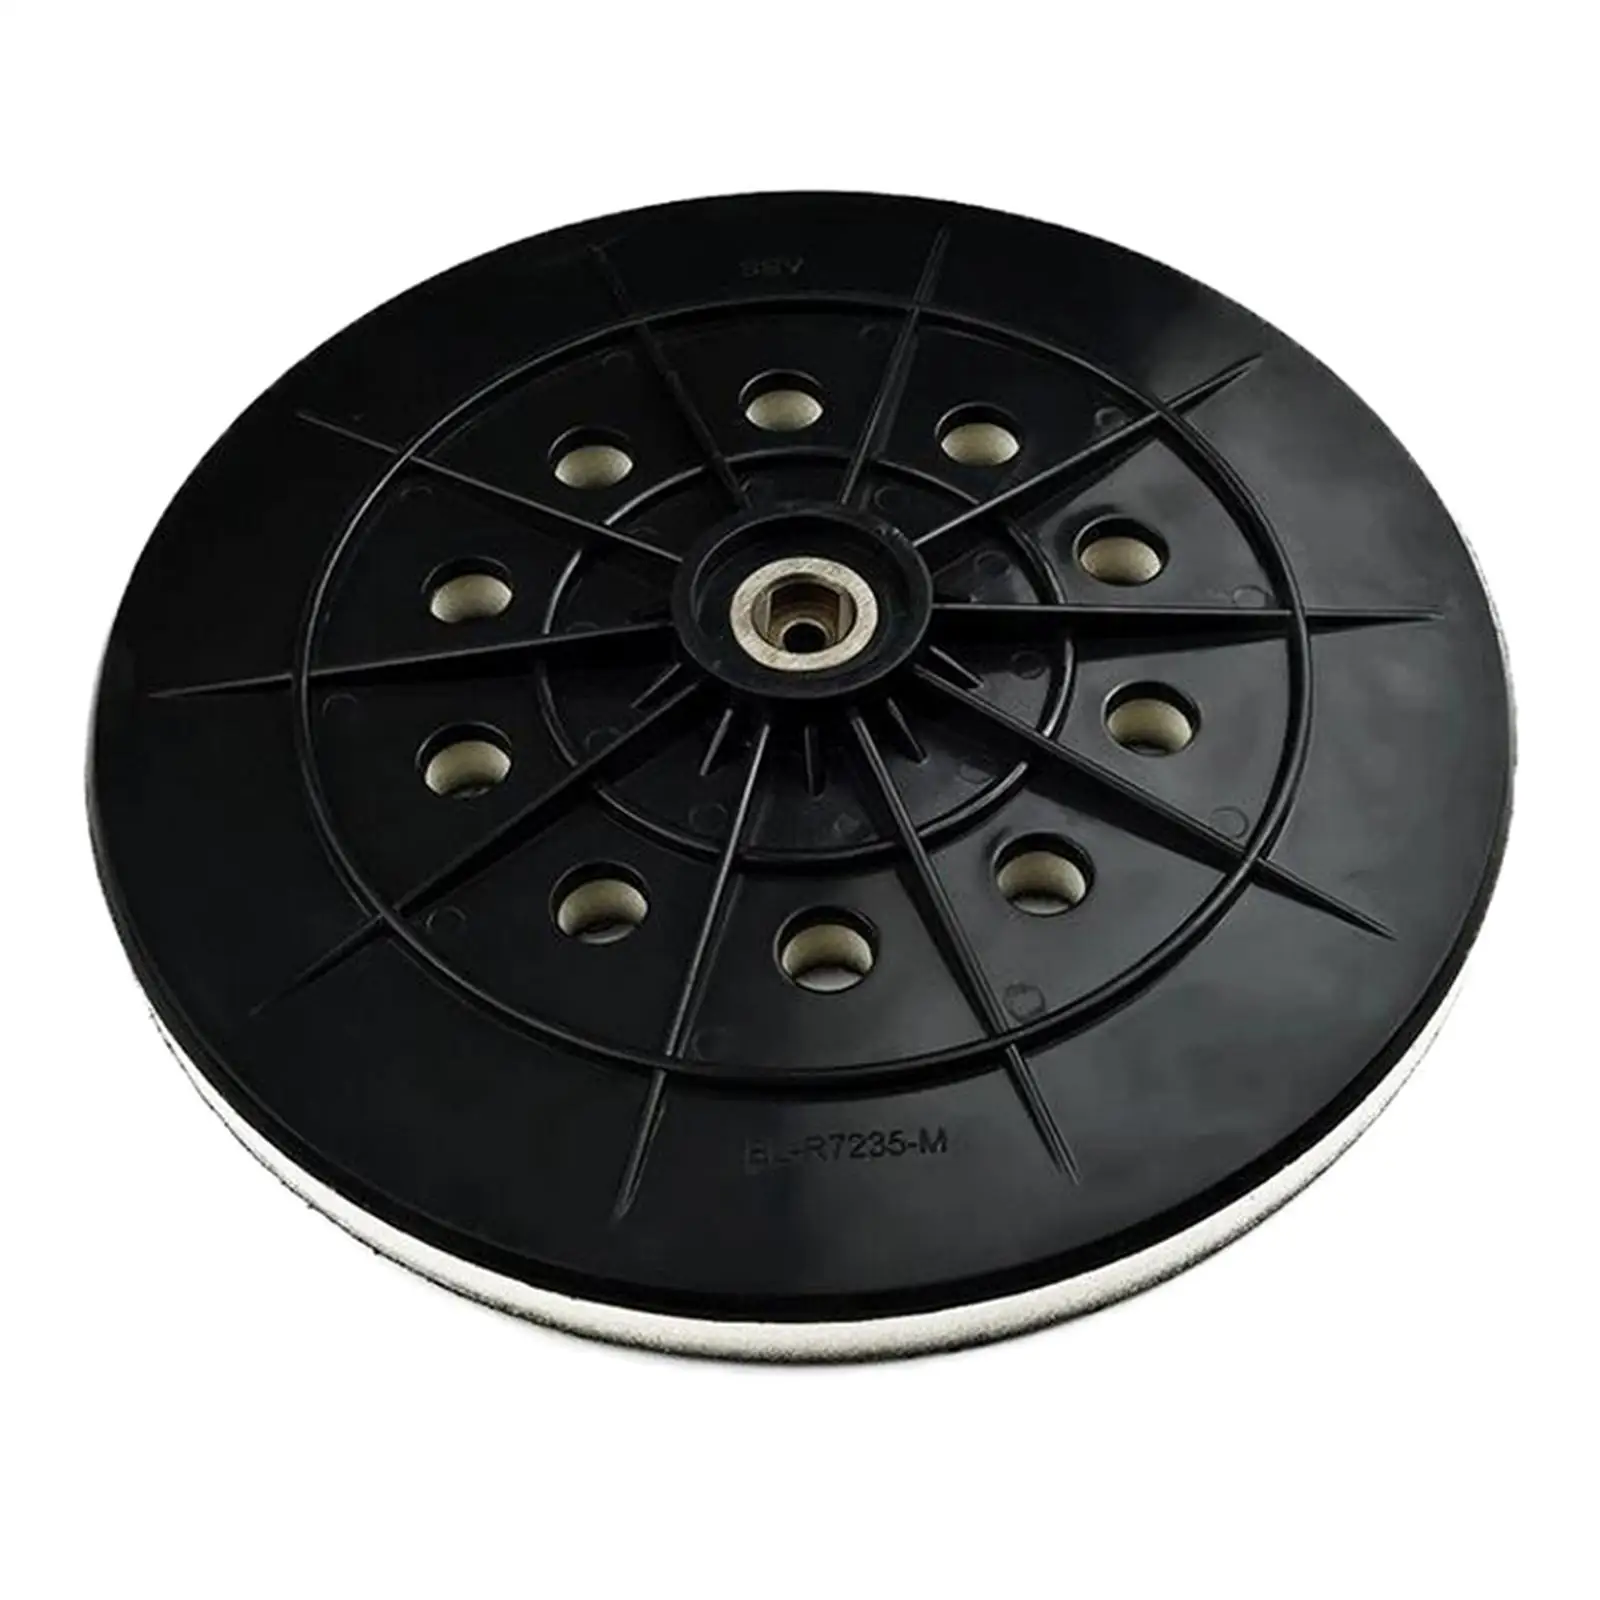  Pad 9 inch 215mm 10 Holes Abrasive Tools Replacement Sander Pad